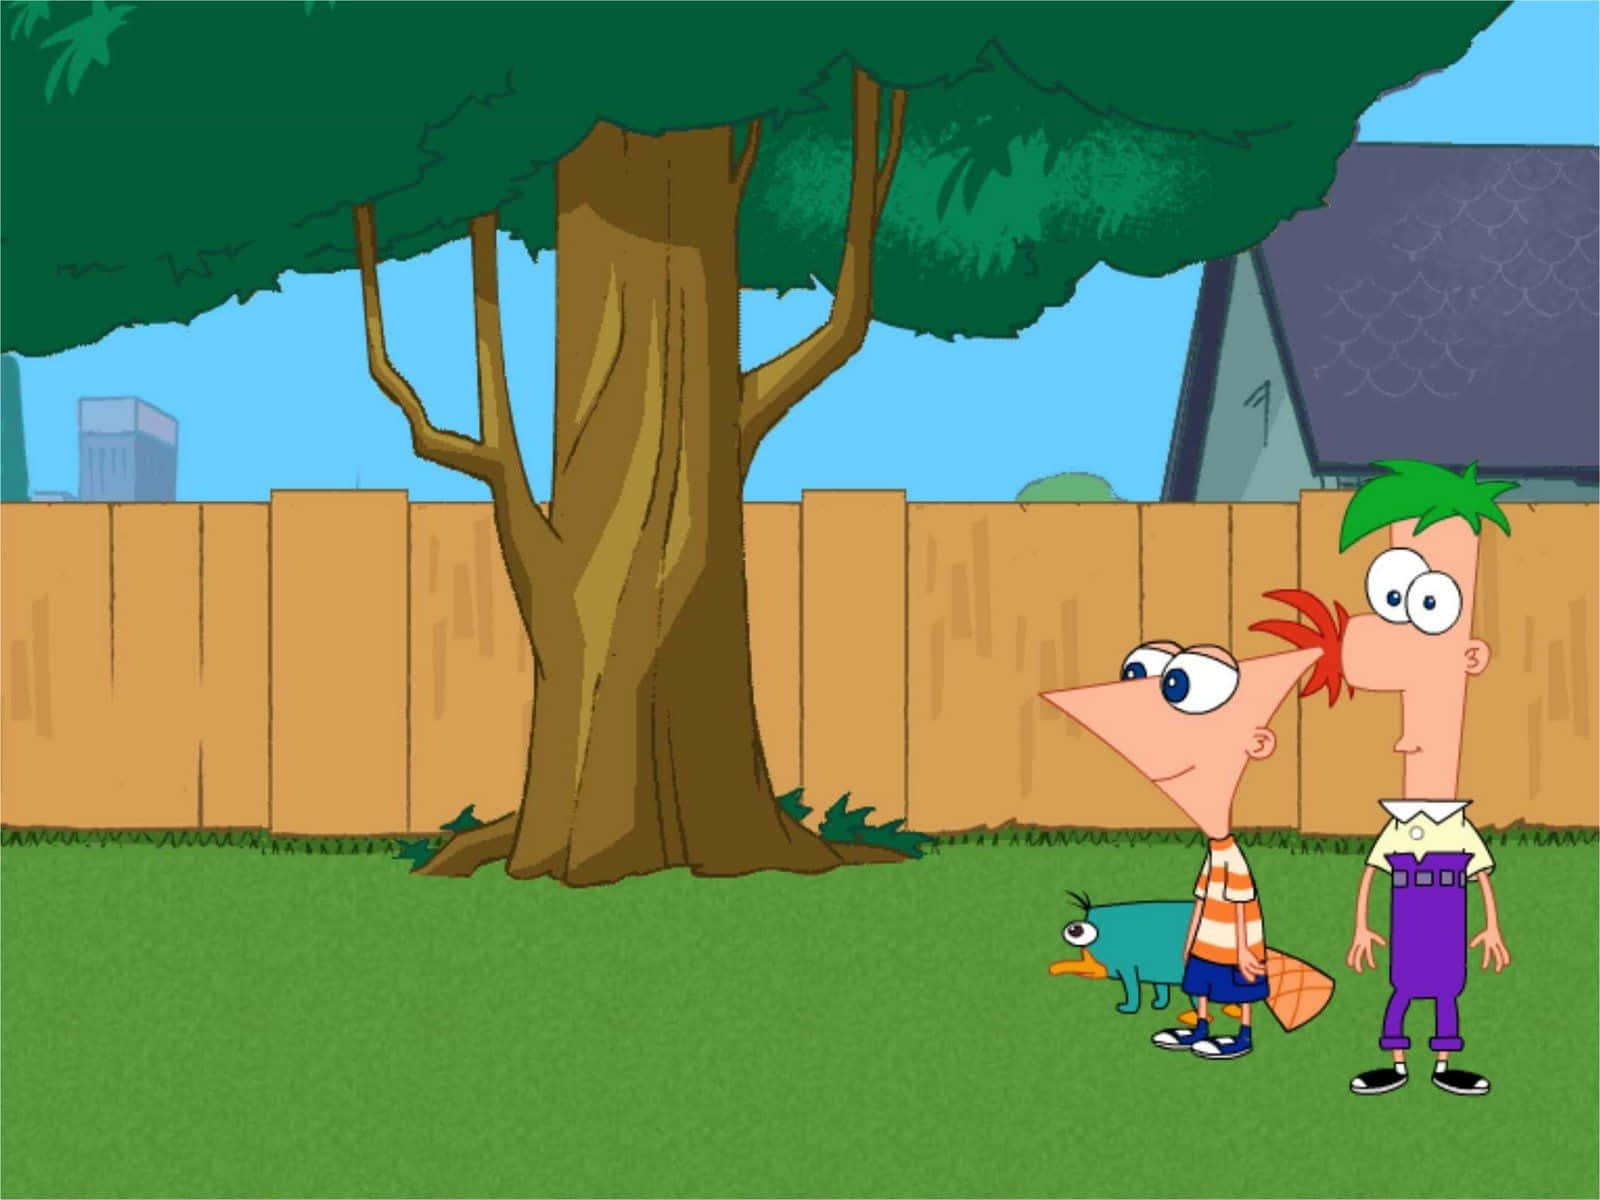 Phineas and Ferb enjoying a fun day together in their colorful and lively world